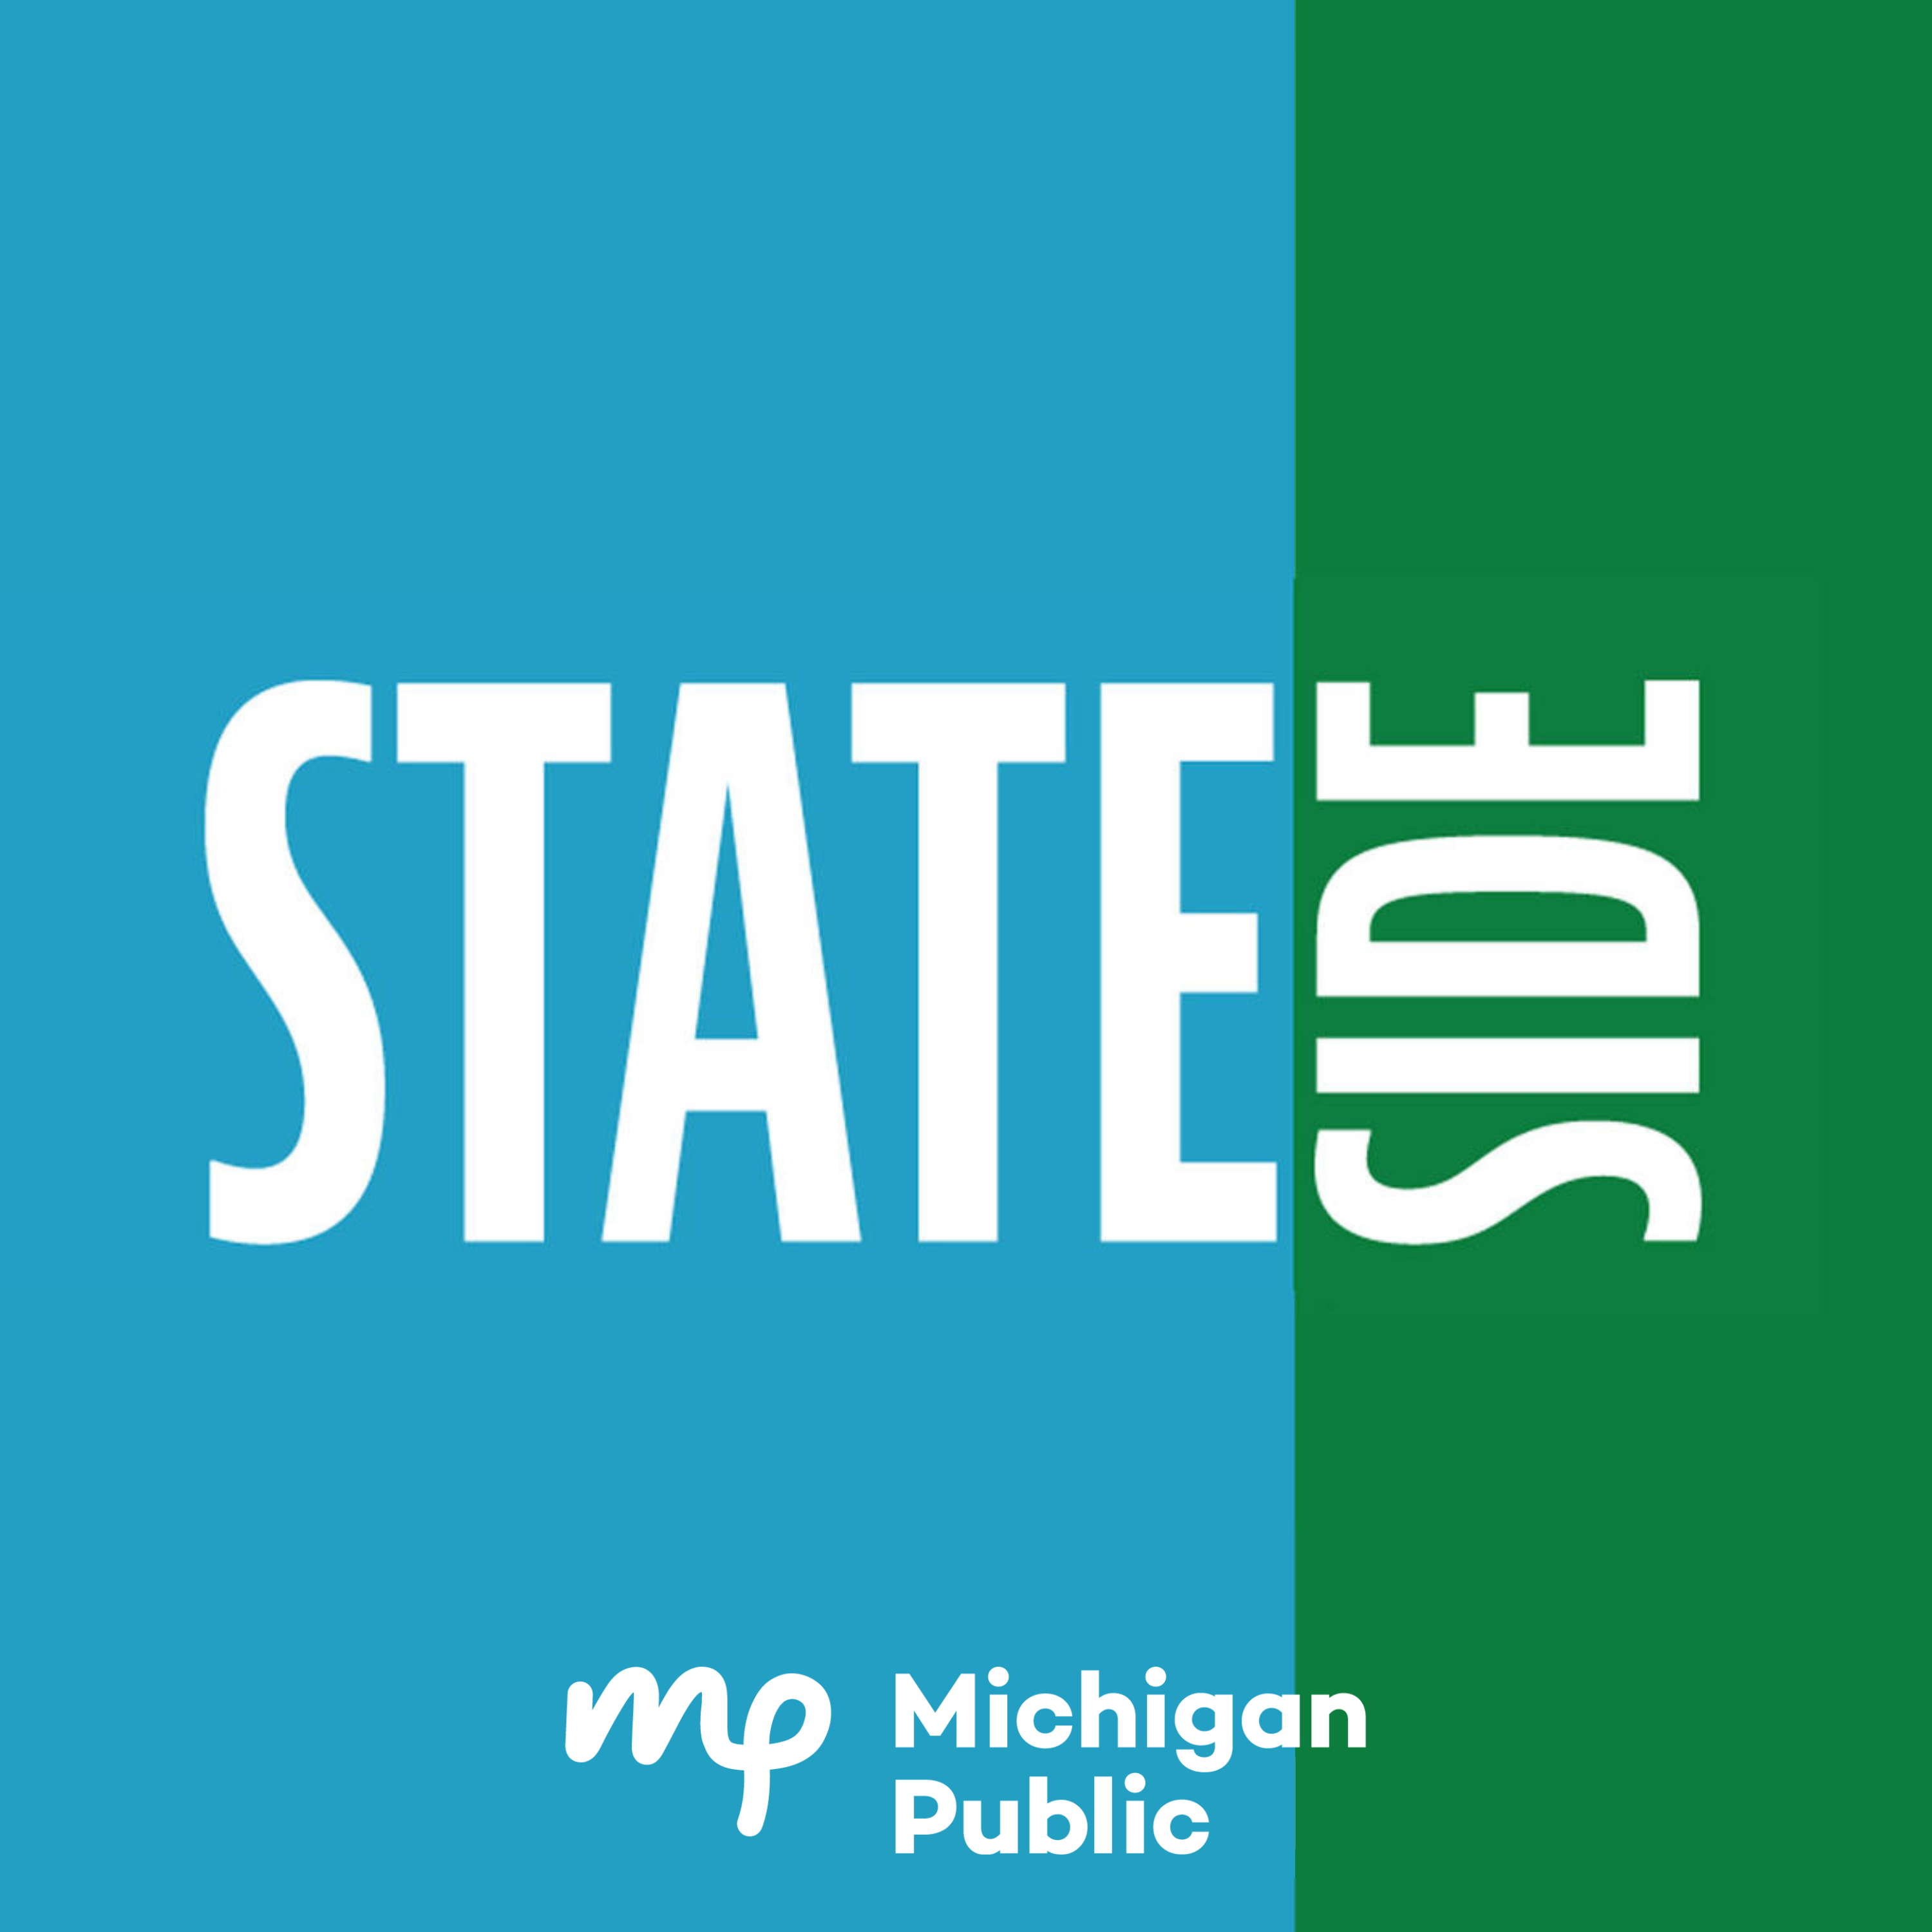 What the SCOTUS 303 Creative Decision Means for MI